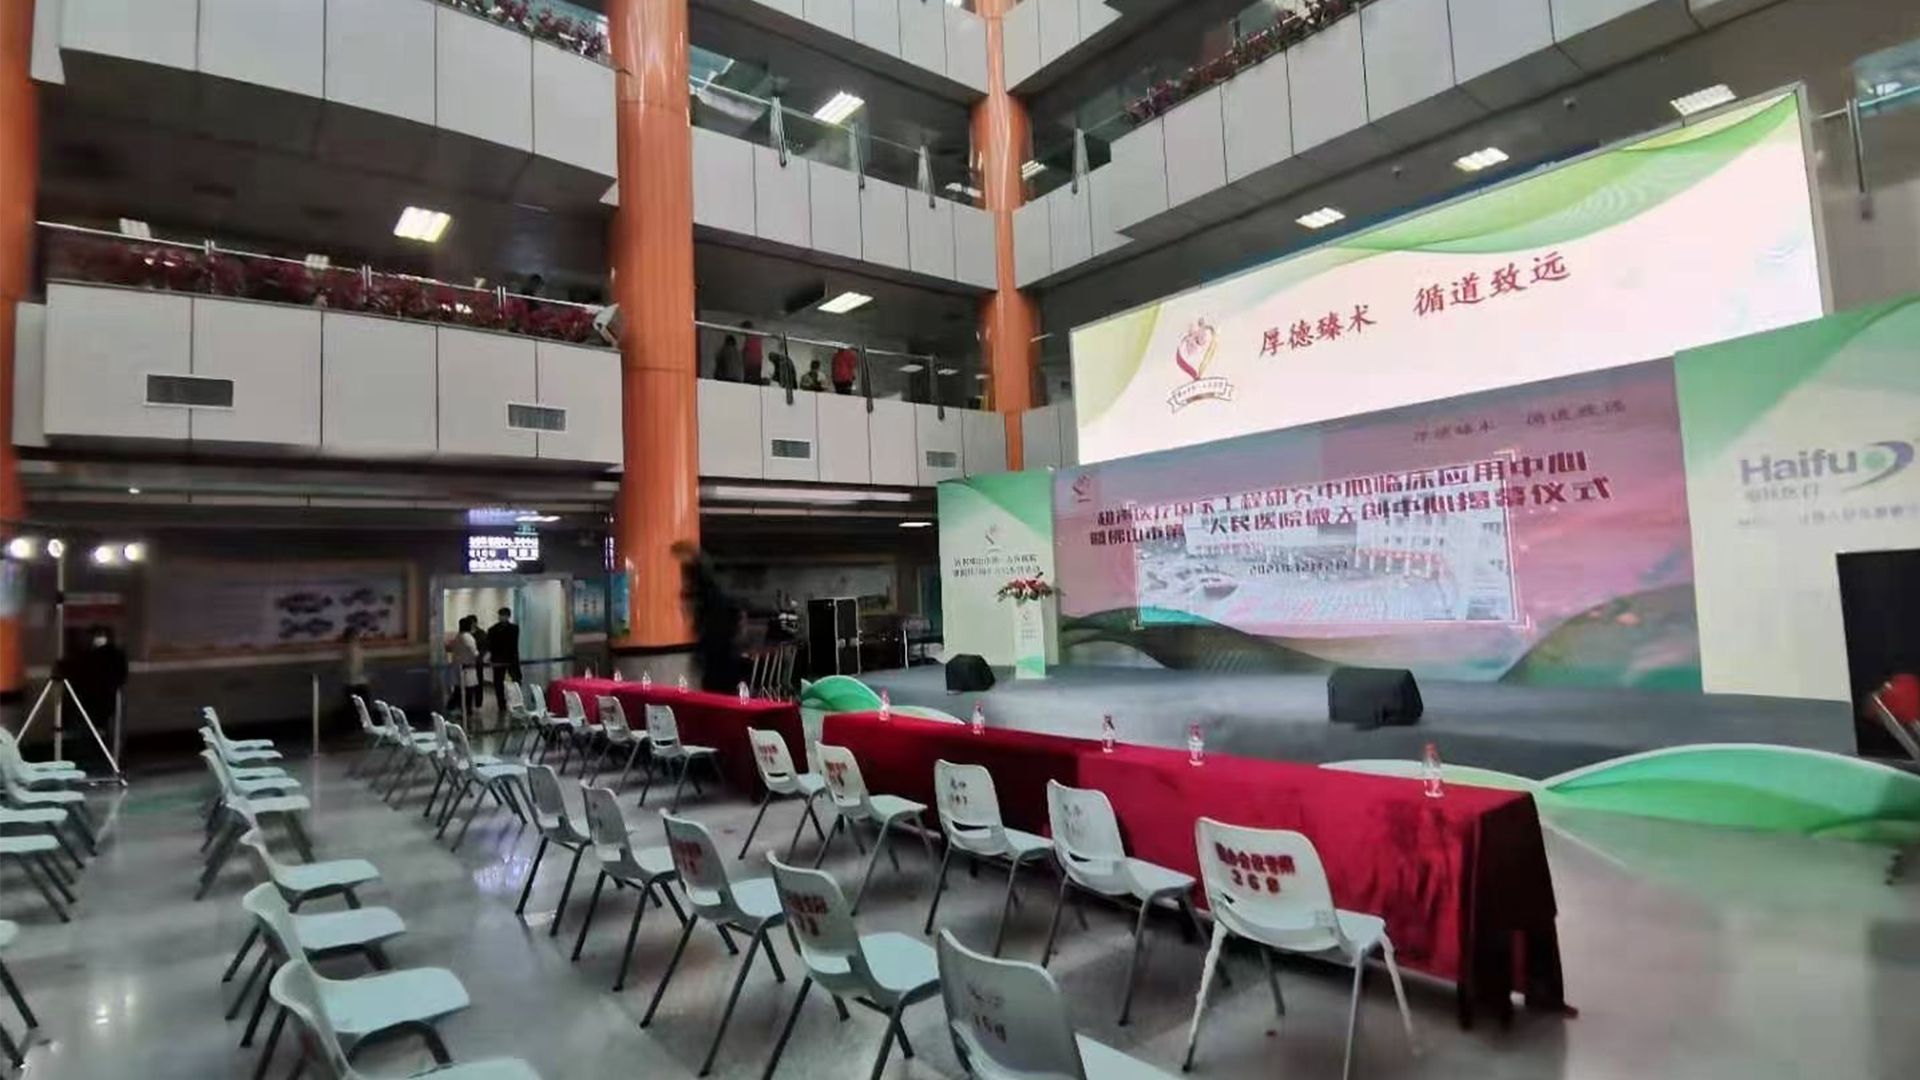 The Grand Opening Event of The Uterine Medical center in Guangzhou Foshan_1